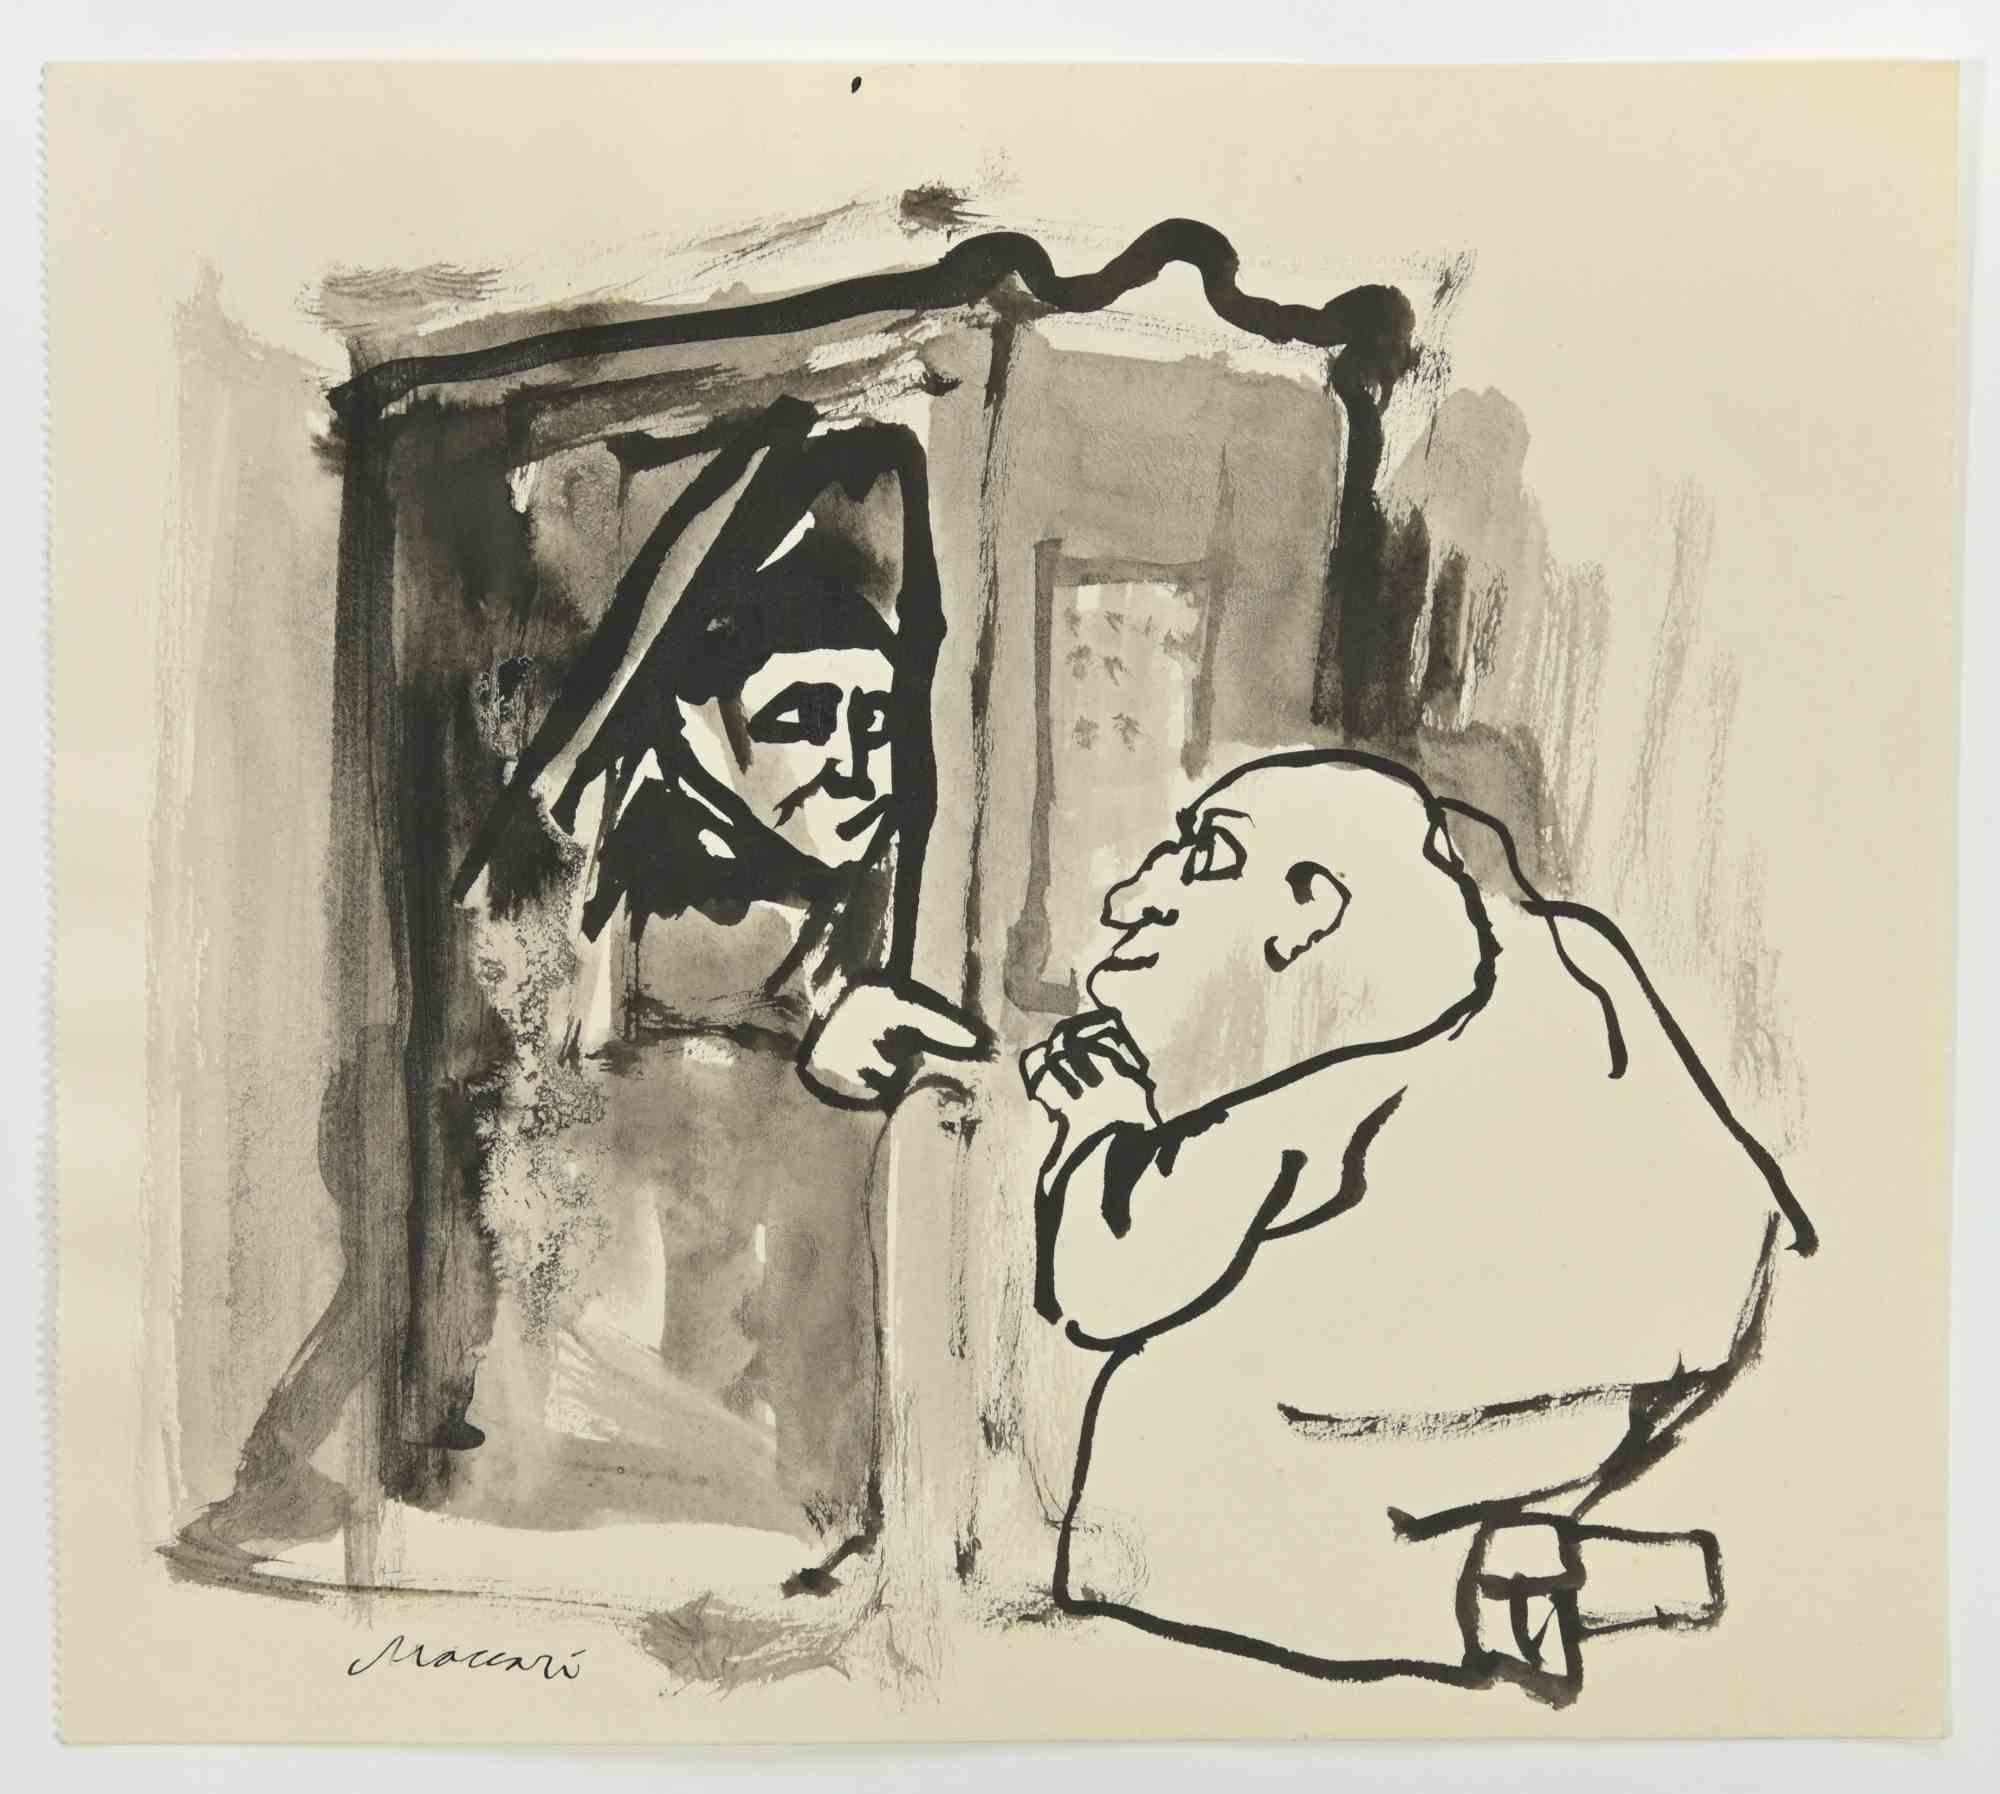 Confession is a watercolor Drawing realized by Mino Maccari  (1924-1989) in the 1960s.

Hand-signed on the lower.

Good condition

Mino Maccari (Siena, 1924-Rome, June 16, 1989) was an Italian writer, painter, engraver and journalist, winner of the